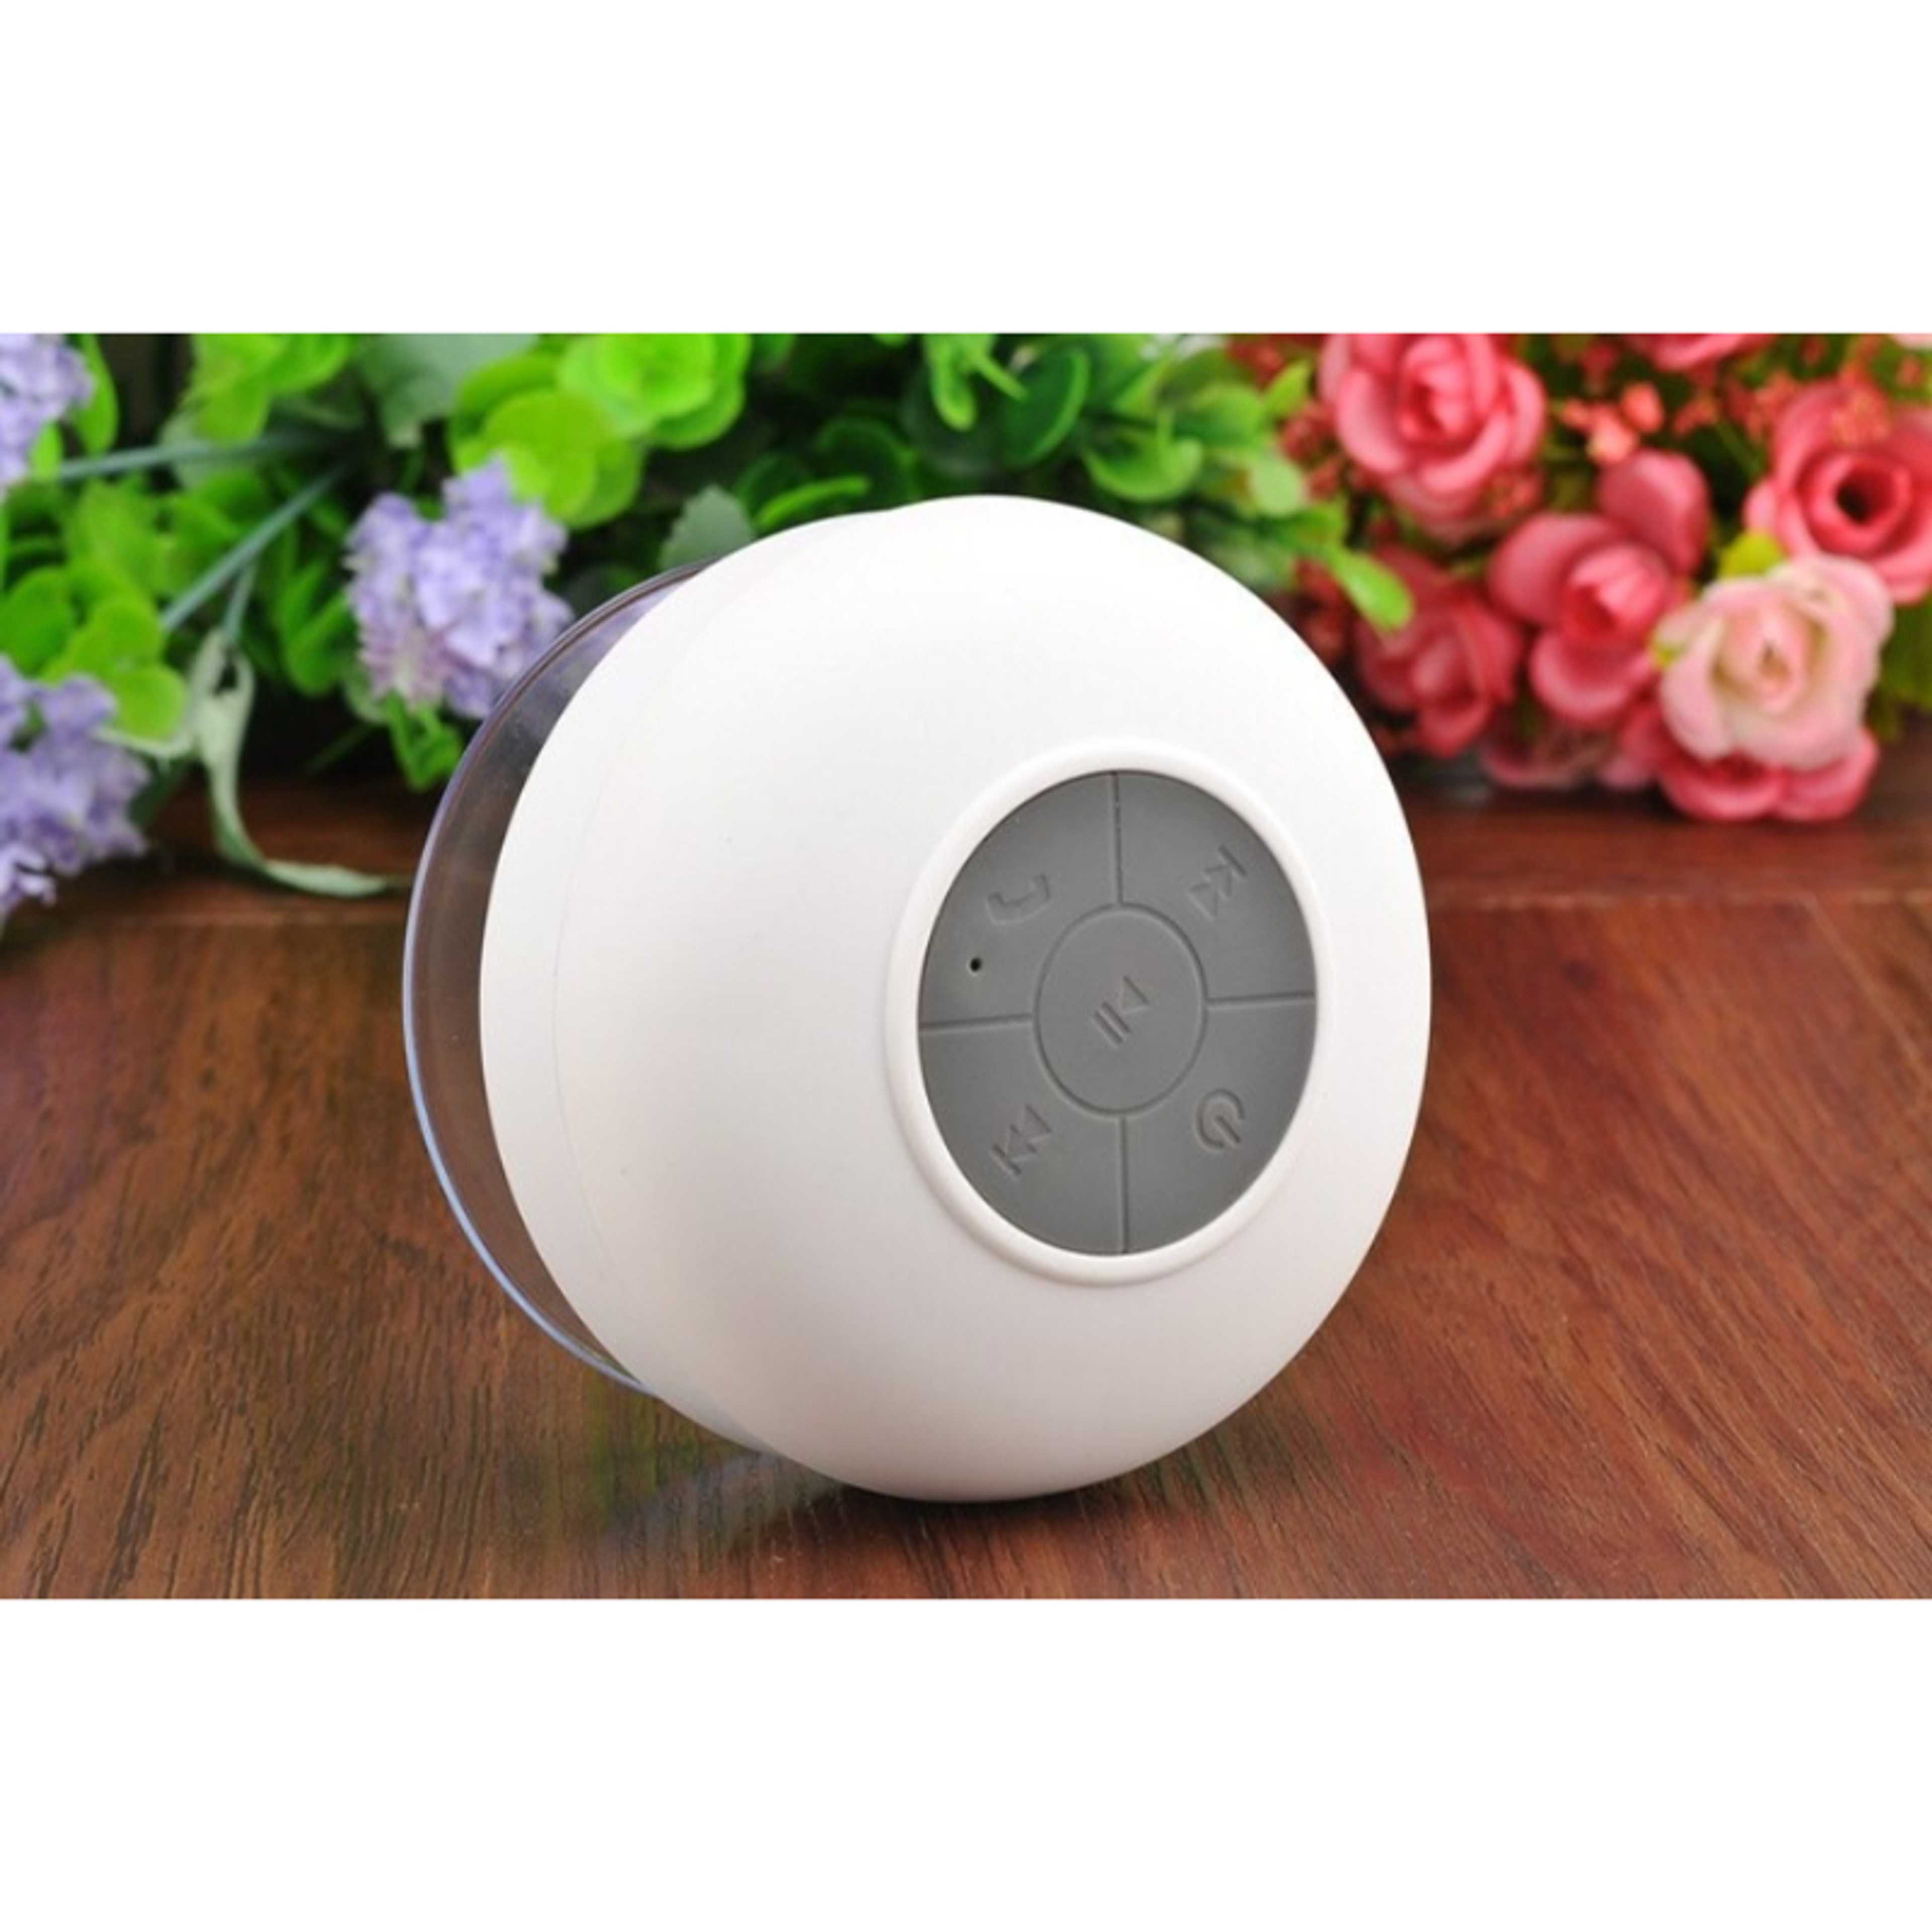 BTS-06 Bluetooth Shower Speaker Water Resistant Built-In Microphone Suction Cup Music Control